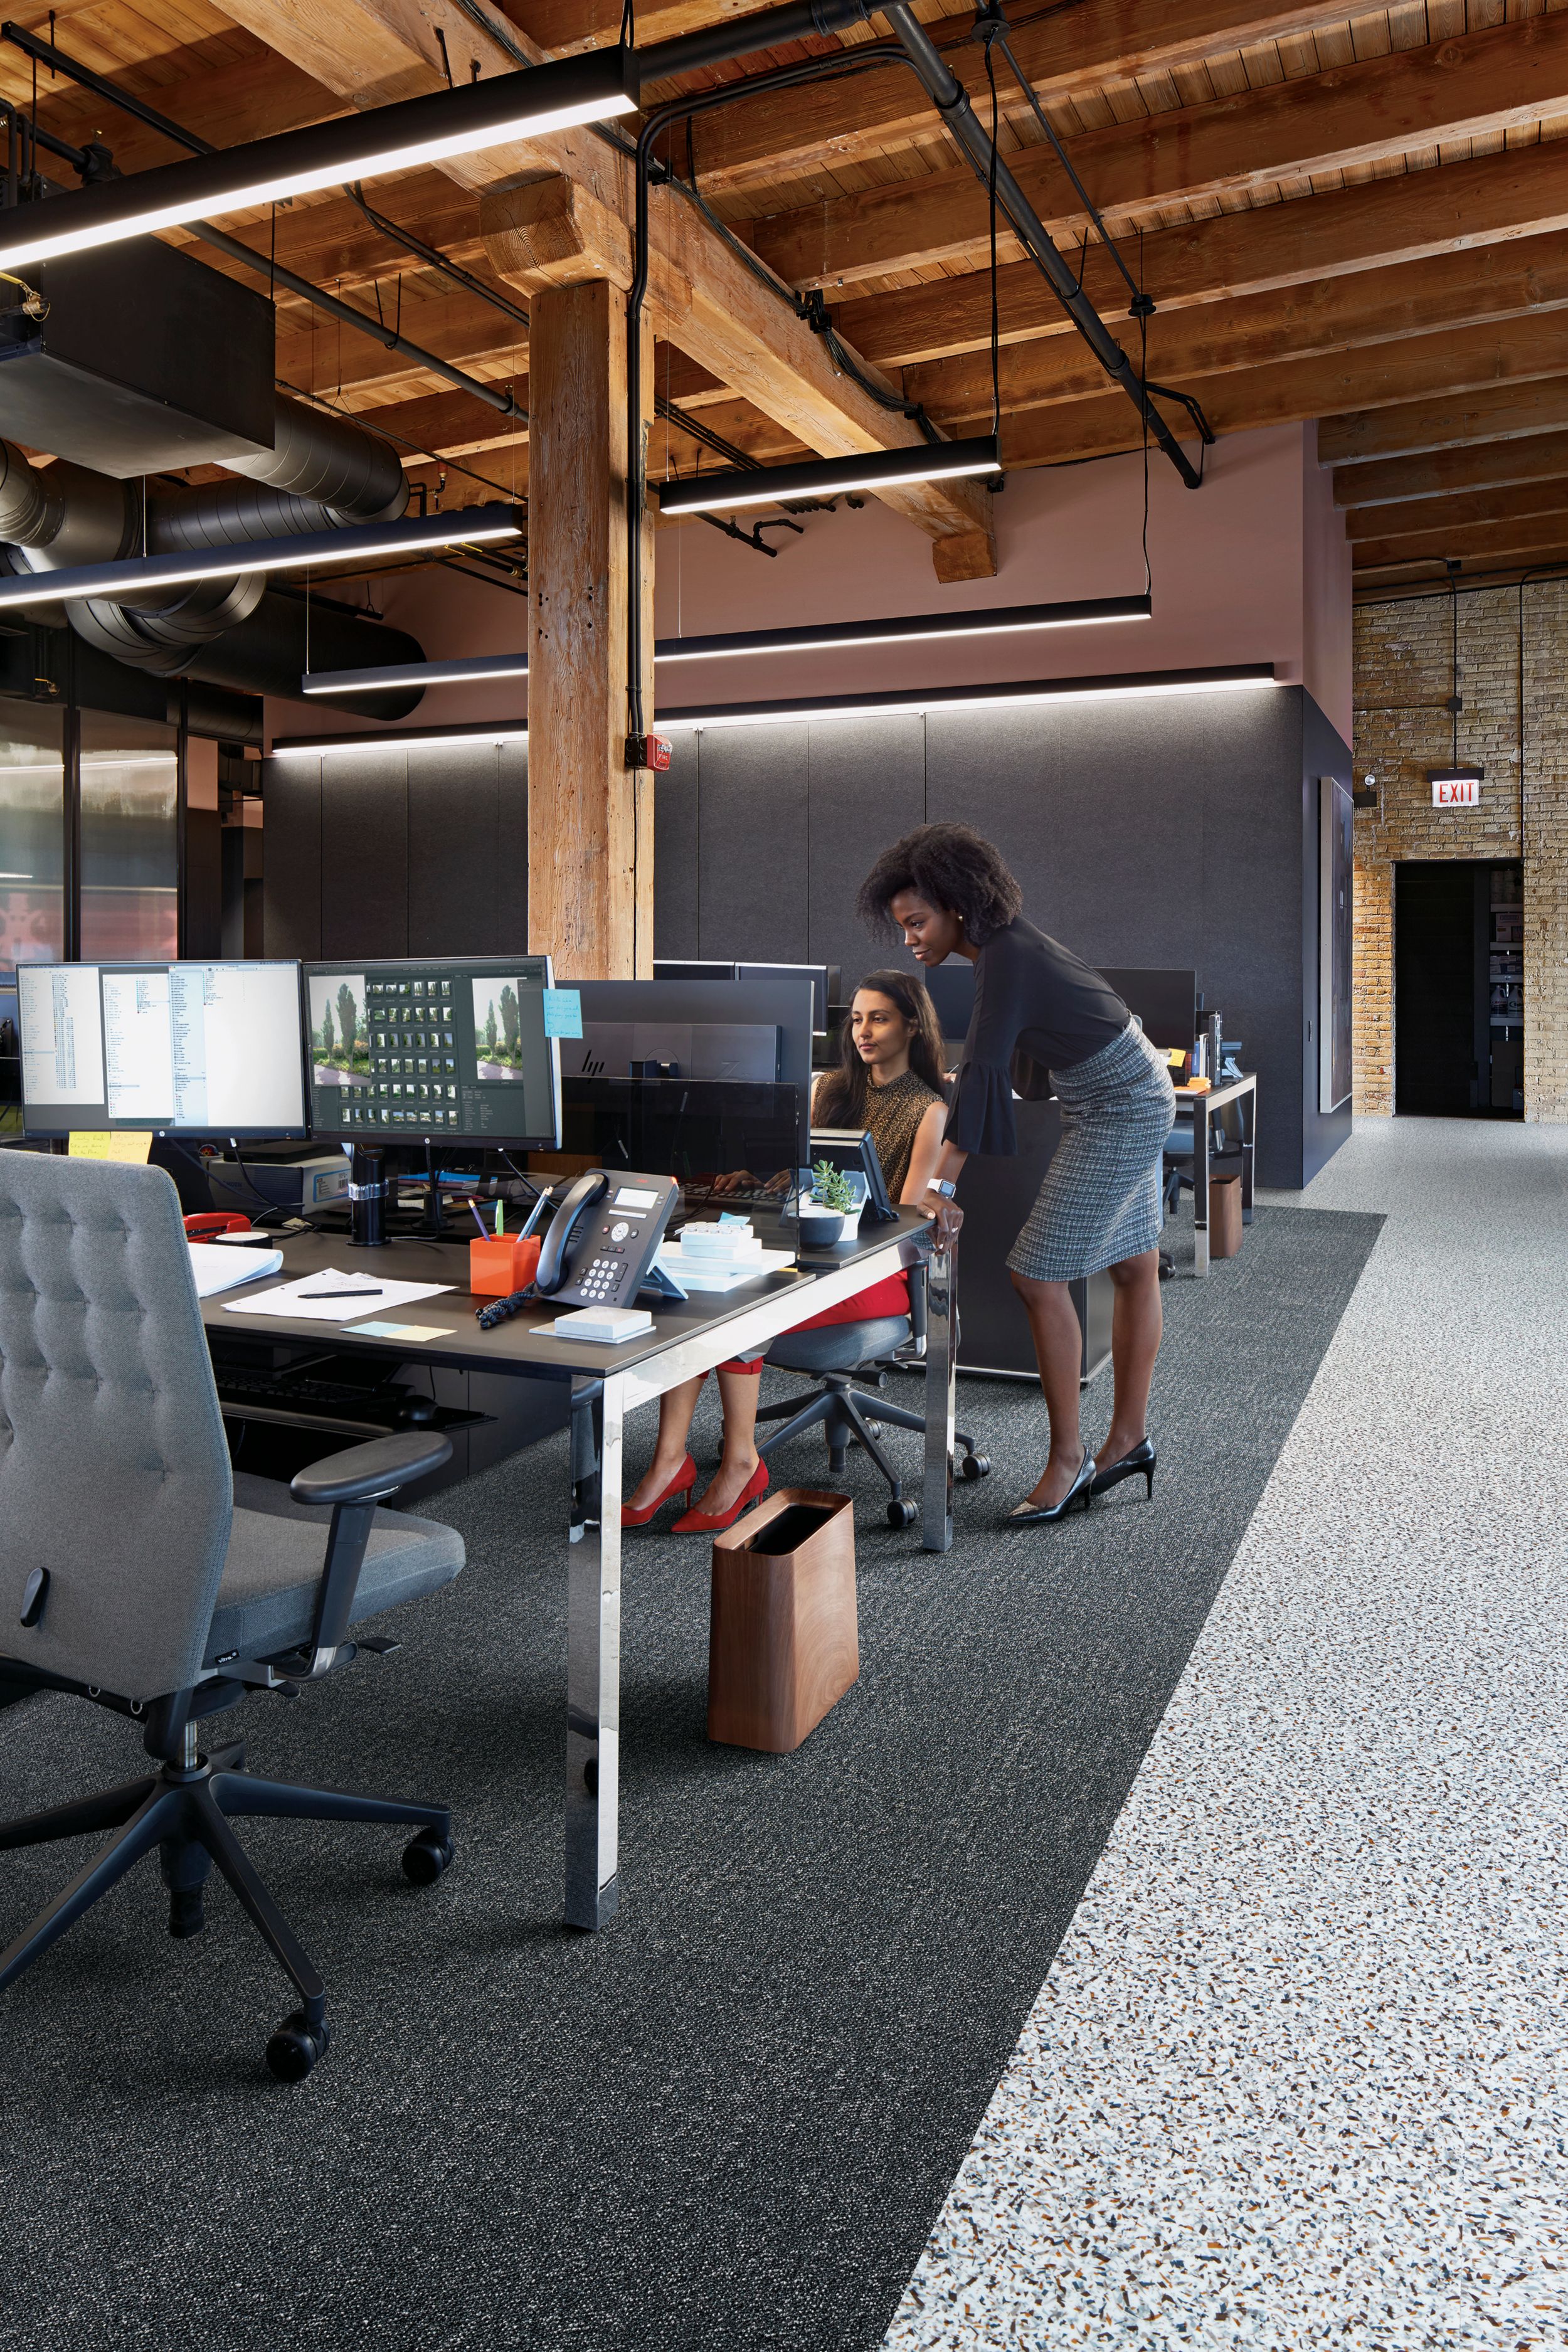 image Interface Step it Up and Walk on By carpet tile in common work space with two people numéro 8